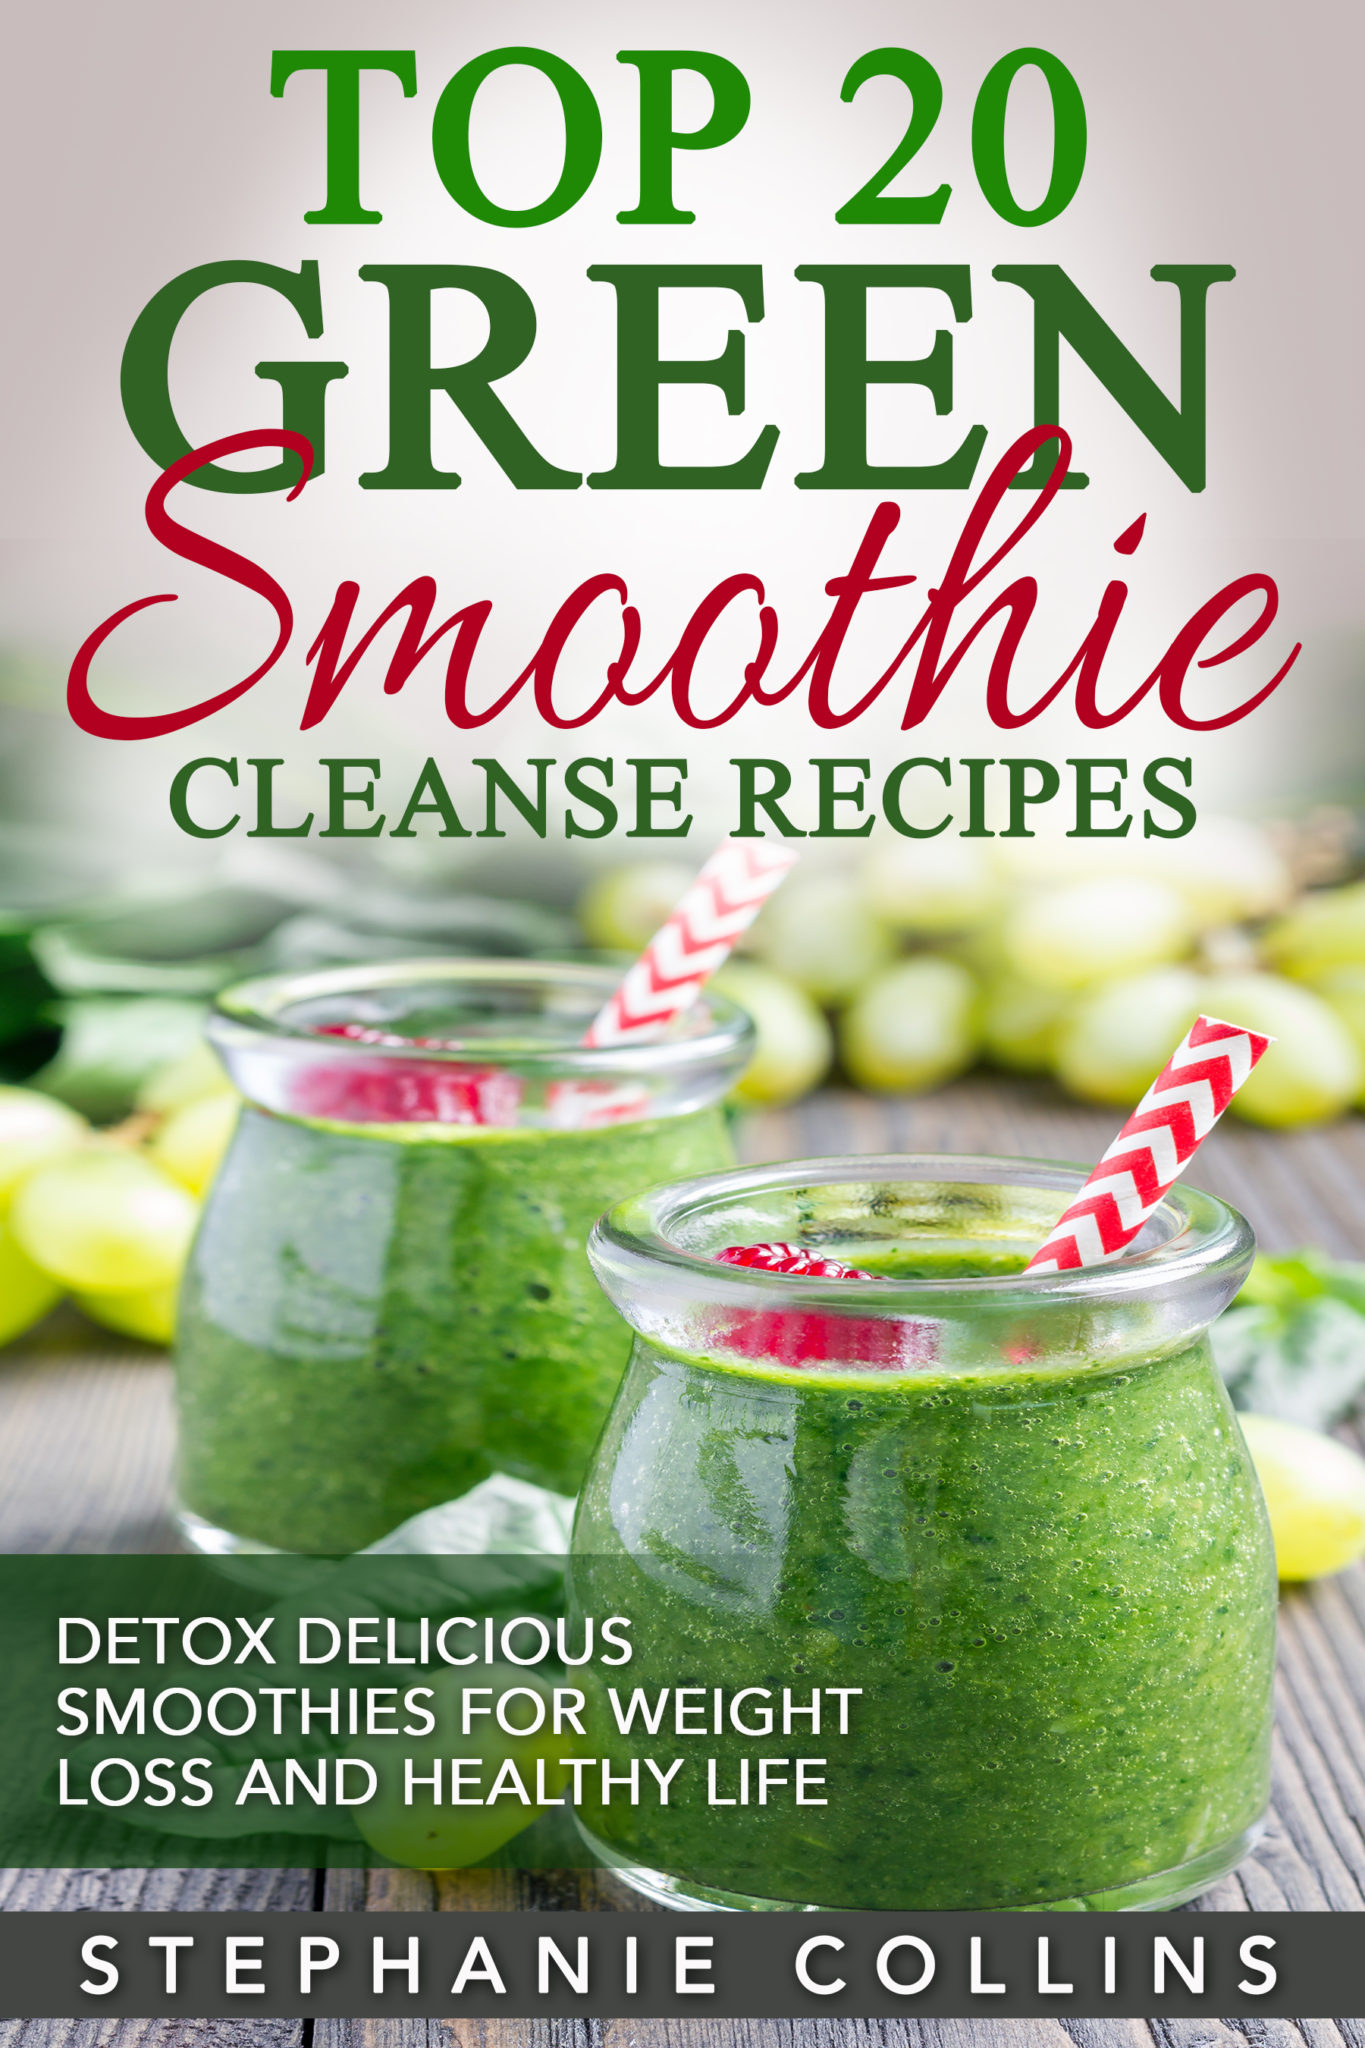 FREE: Top 20 Green Smoothie Cleanse Recipes: Detox Delicious Smoothie for Weight Loss and Healthy Life + 5 recipes (free bonus) by Stephanie Collins